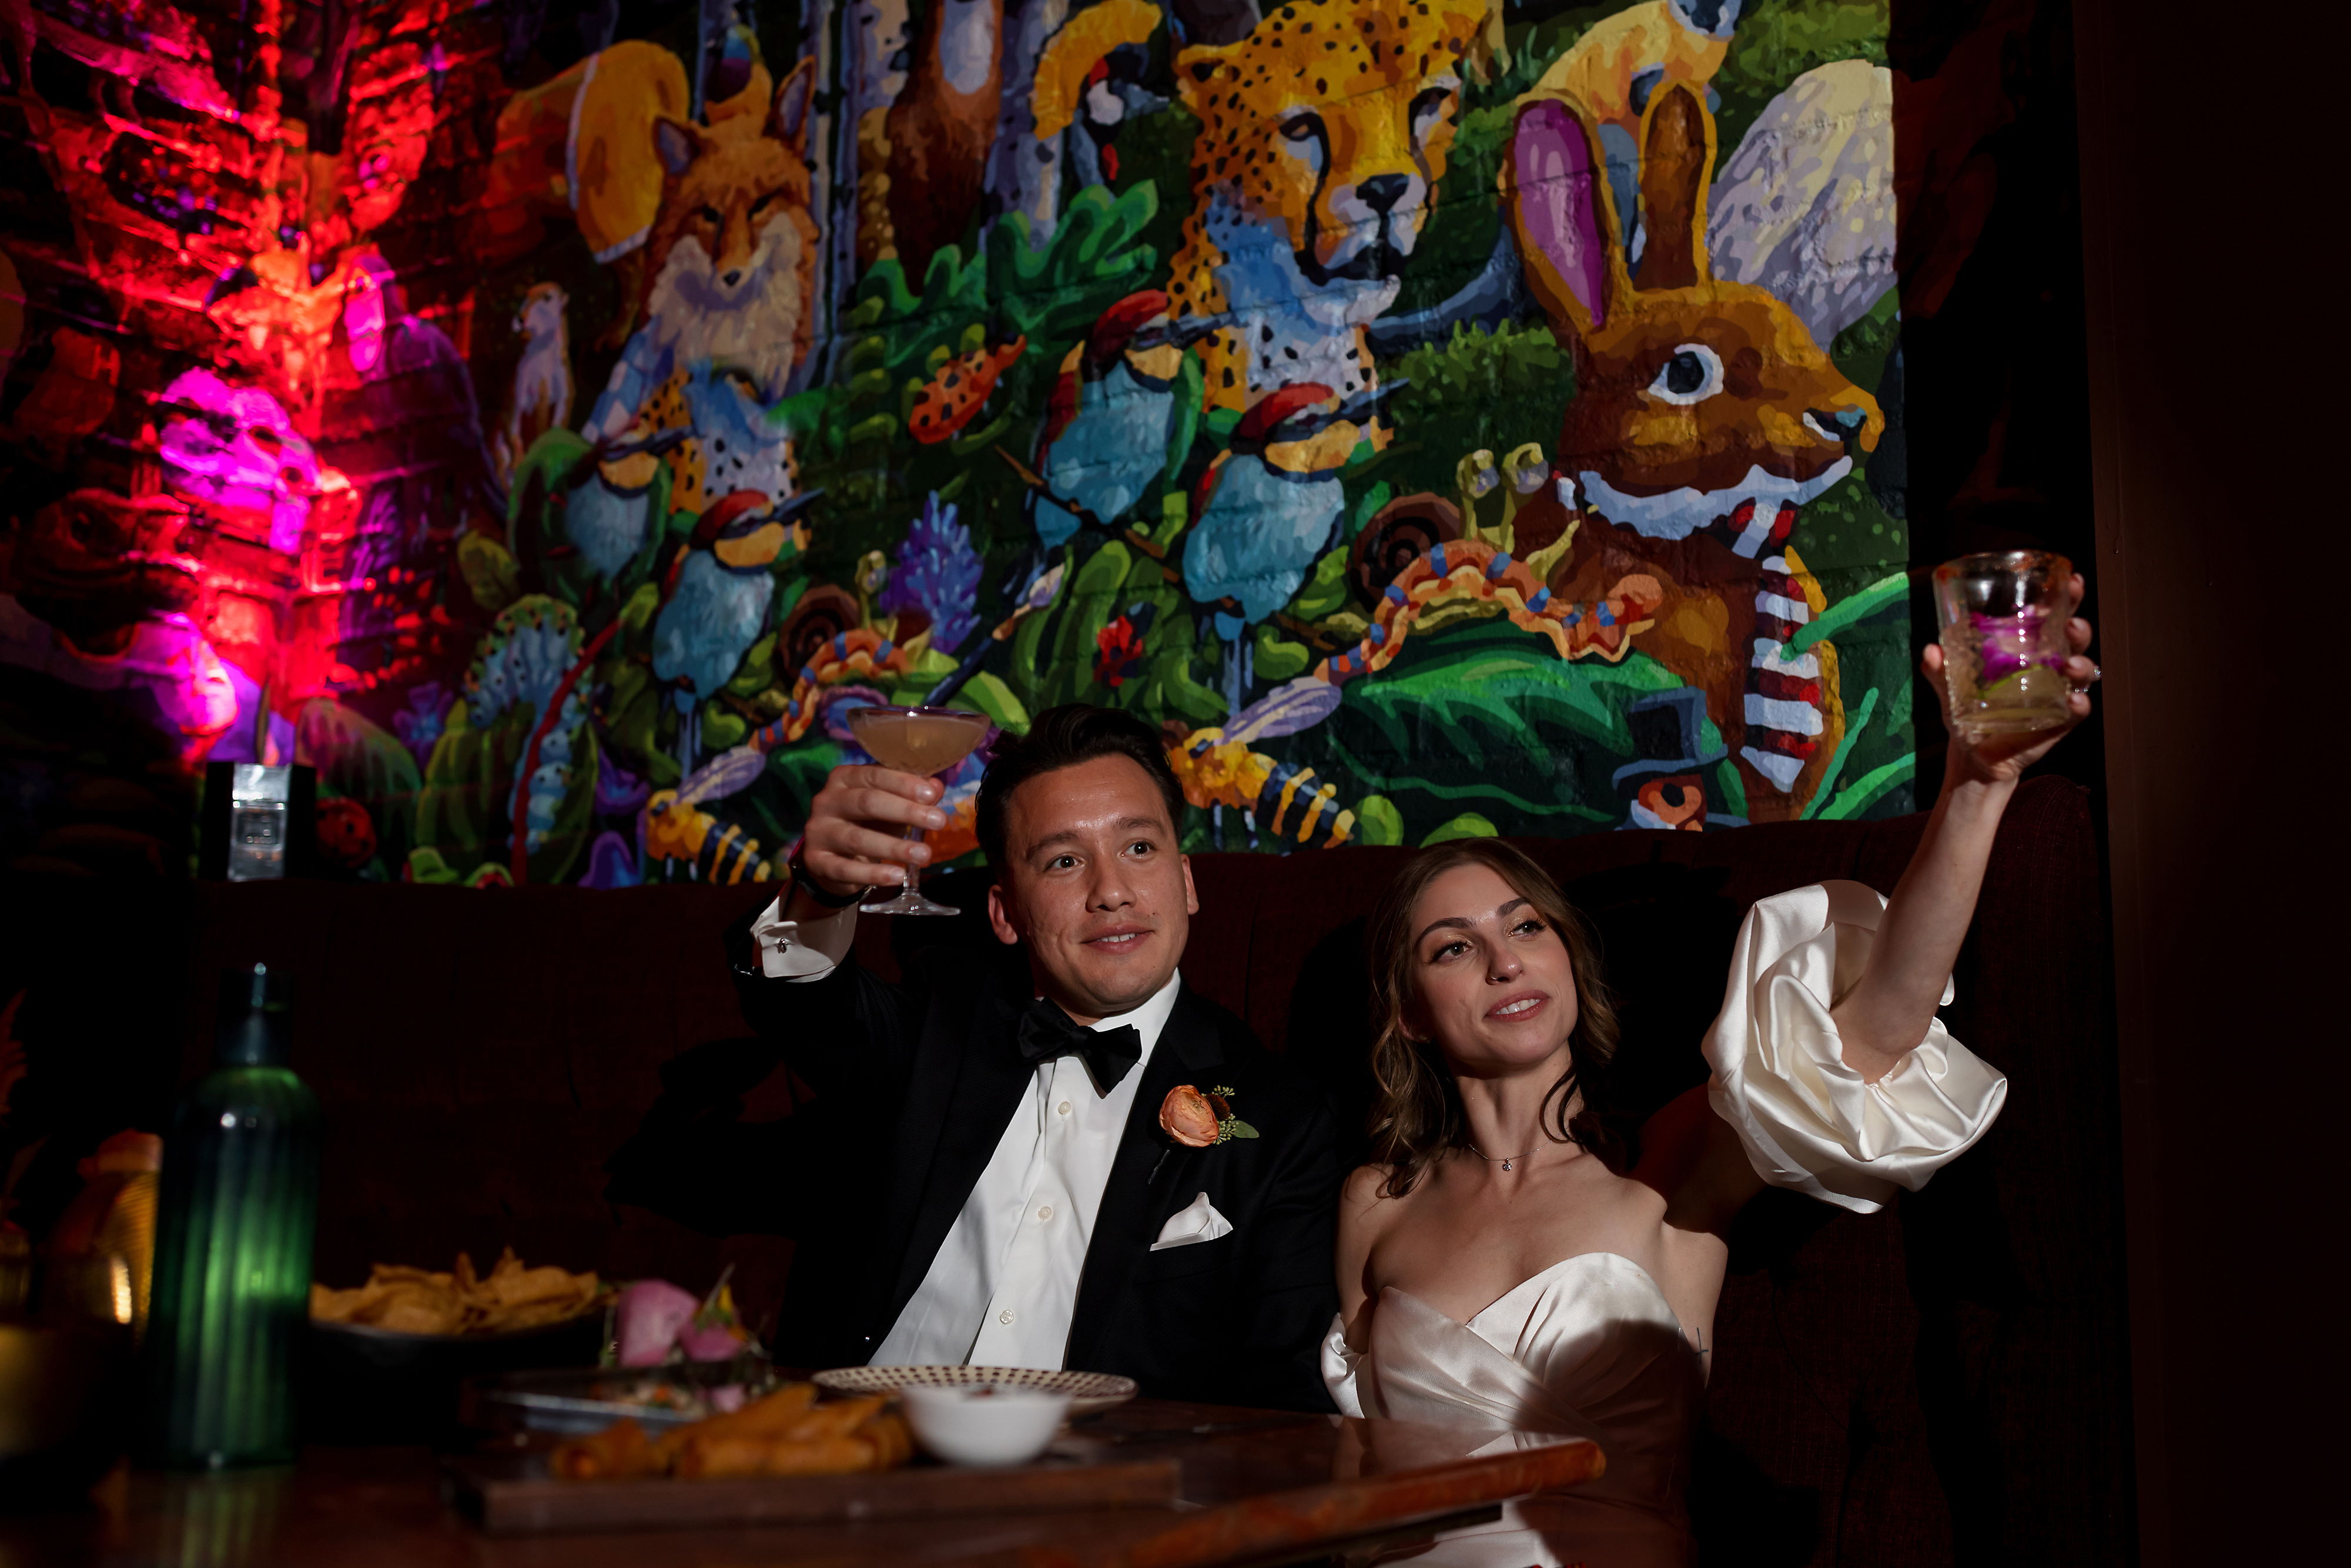 Father of bride toast during wedding reception at Tabu Restaurant in Chicago's West Loop